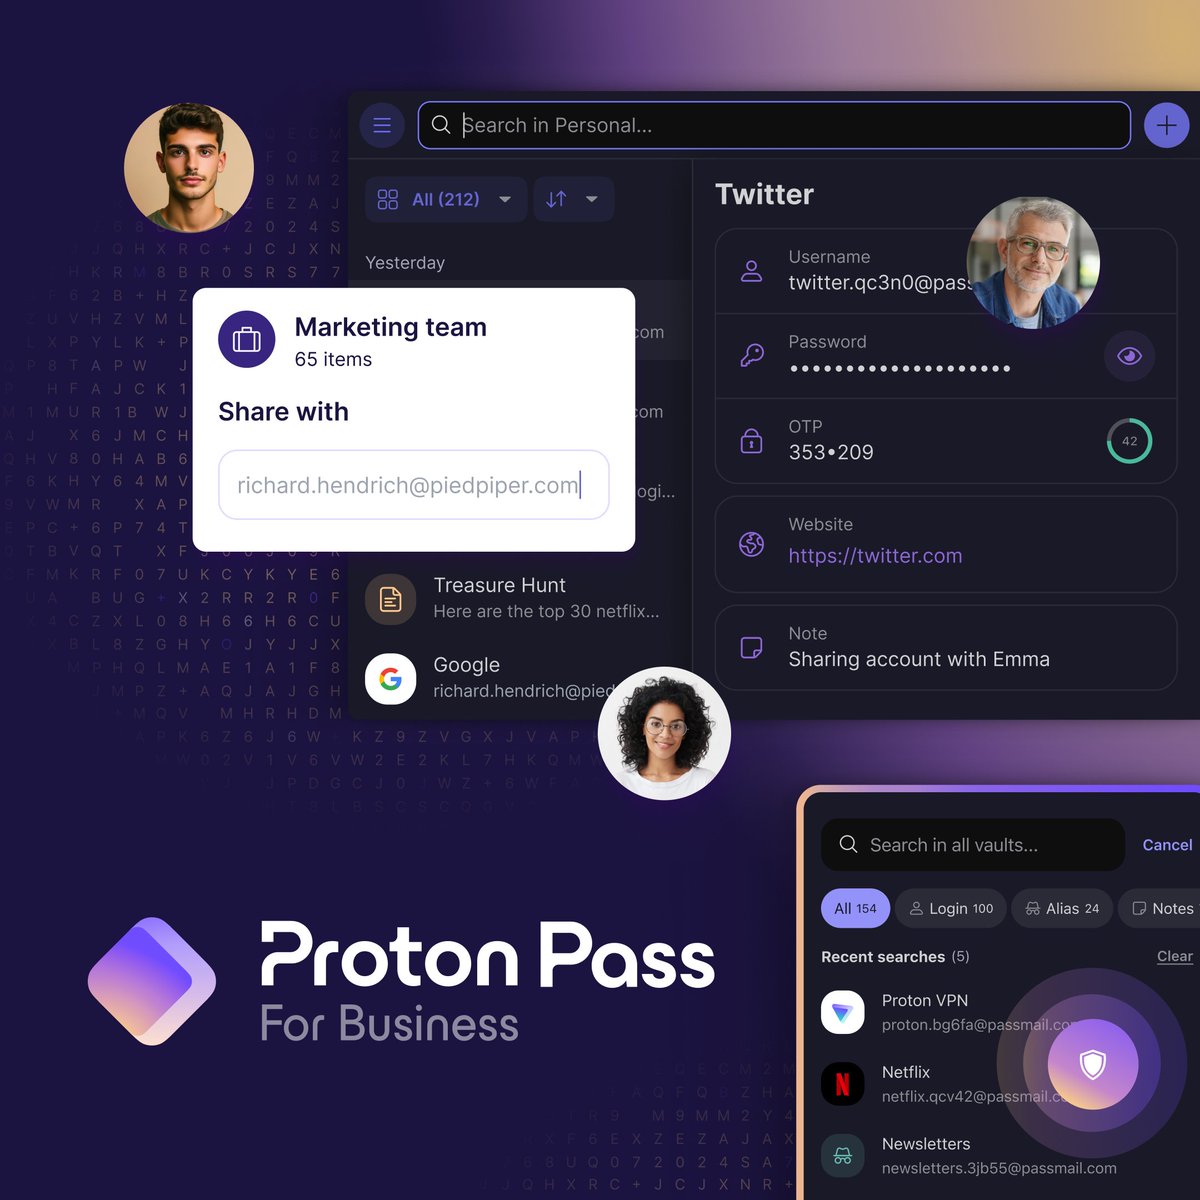 Proton Pass for business is here!

Over 50,000 businesses already trust @ProtonMail to keep their emails private, and starting today, your team can use a #PasswordManager that’s open source, GDPR compliant, and protected by strict Swiss privacy laws.

Sign up for #ProtonPass now